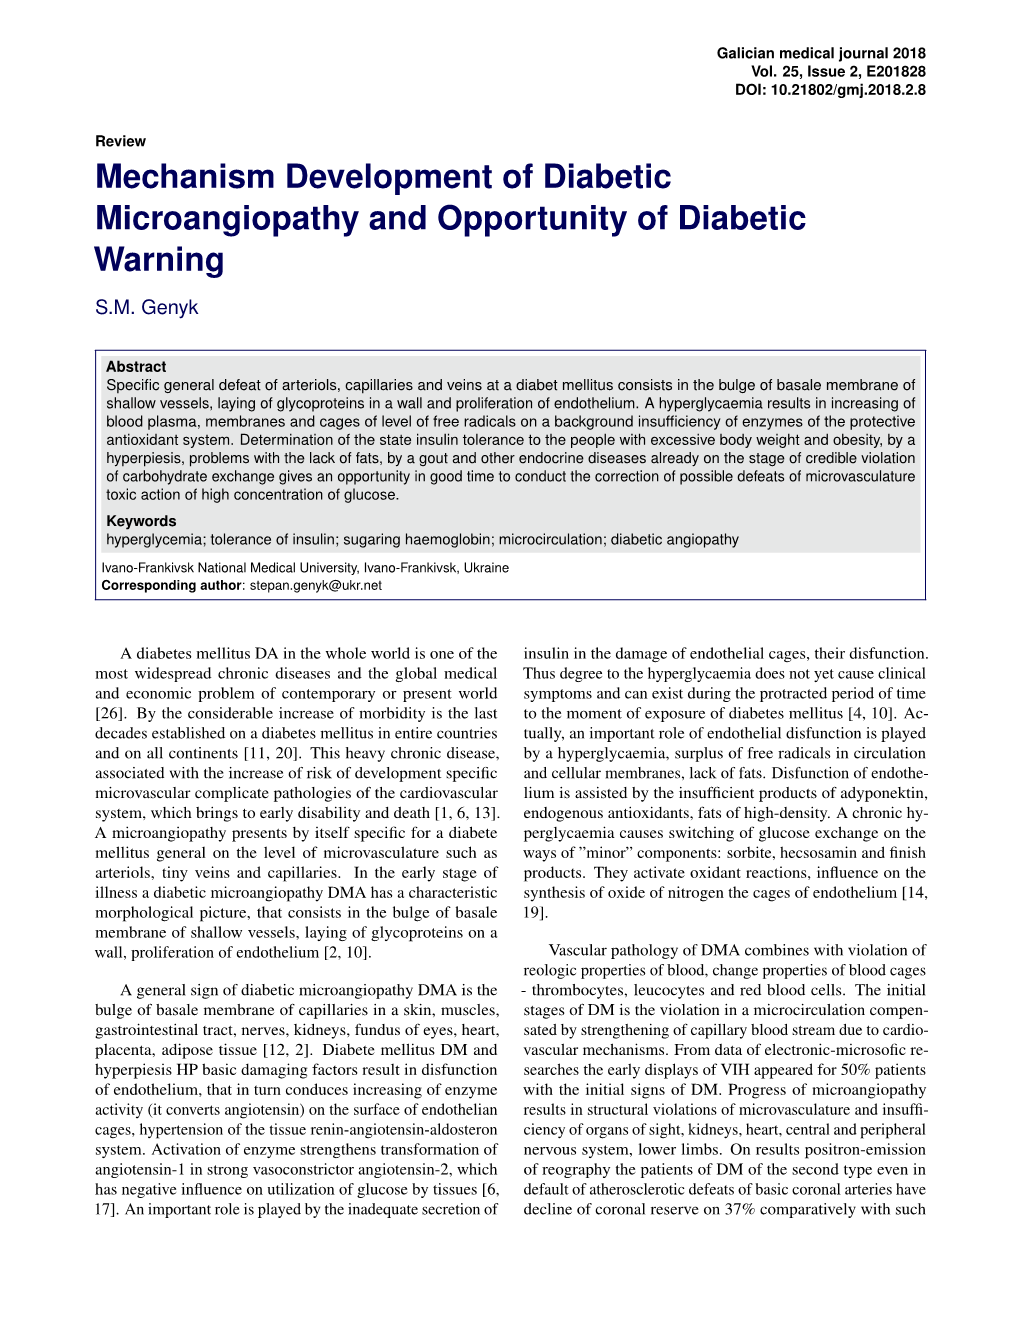 Mechanism Development of Diabetic Microangiopathy and Opportunity of Diabetic Warning